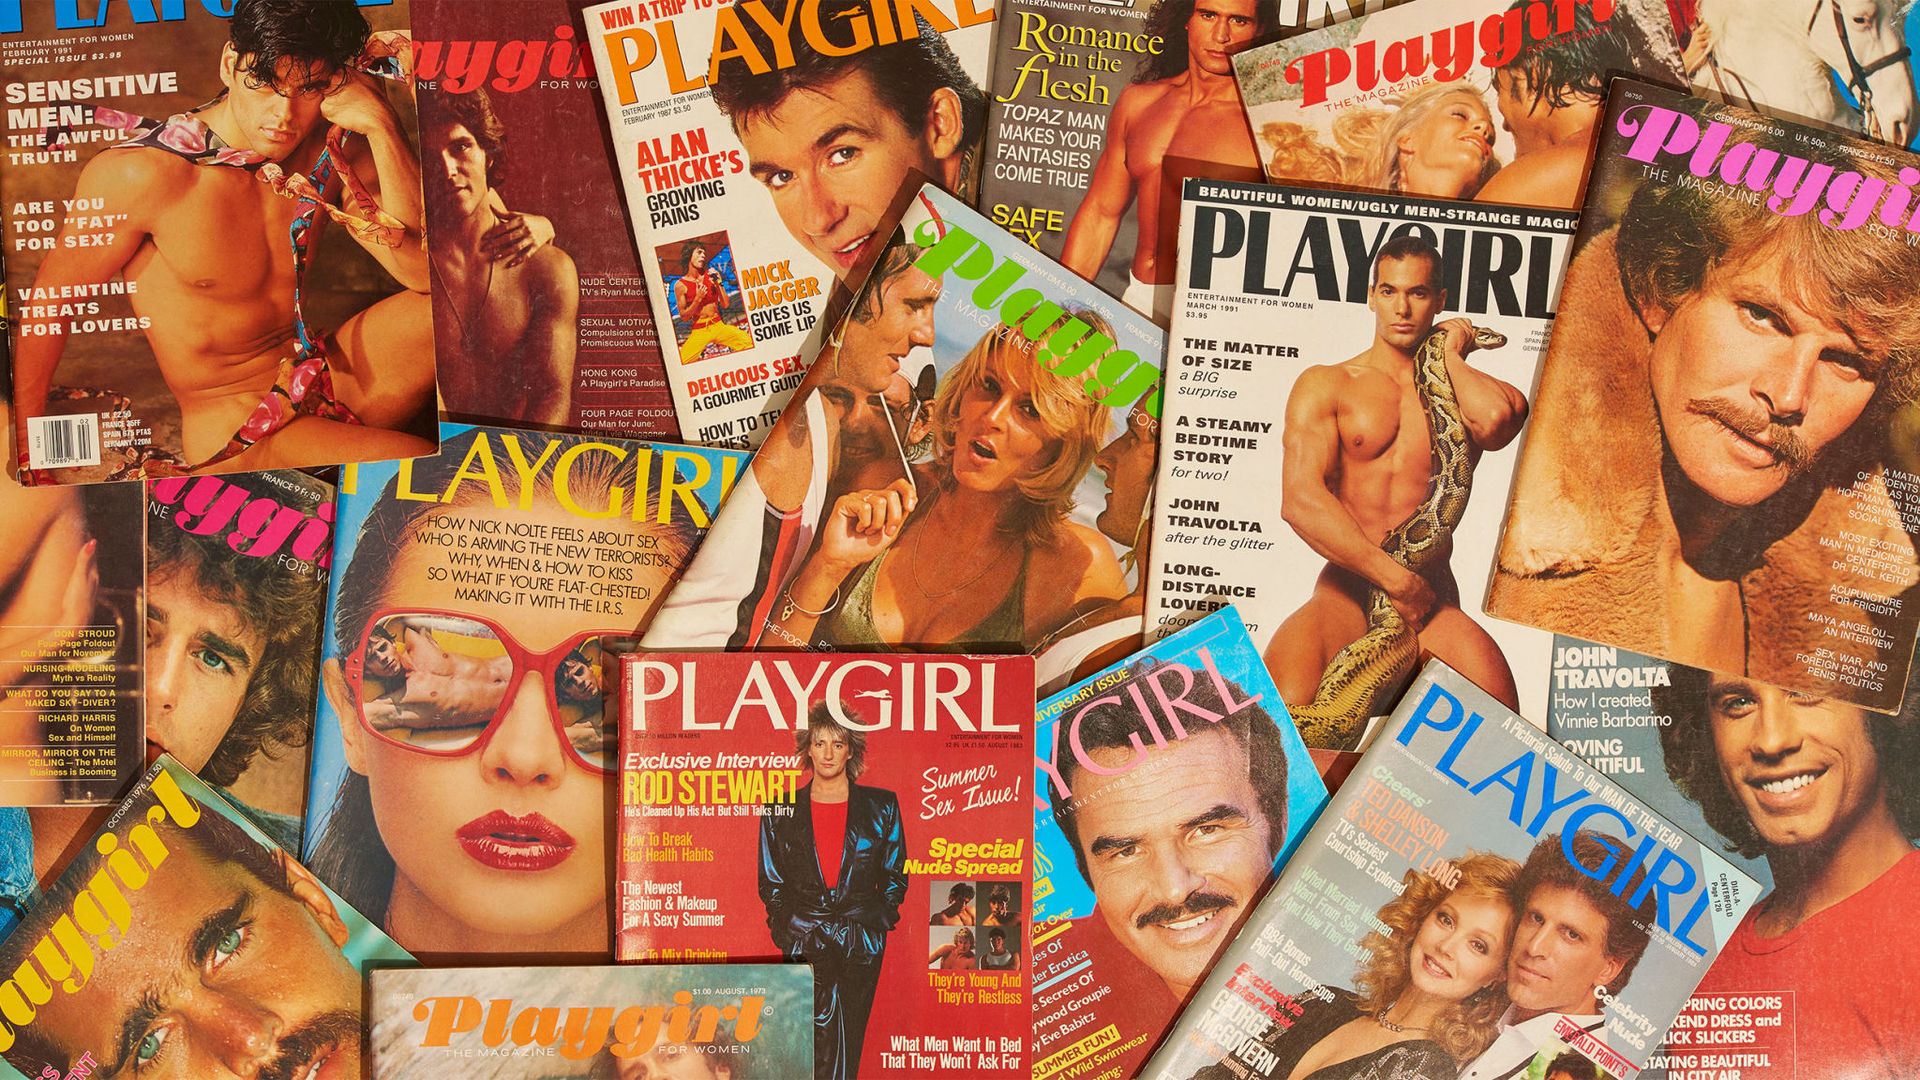 America Sex With Two Girls And One Boy Hd Video Of This Year - History of Playgirl Magazine - How Playgirl Normalized Male Nudity